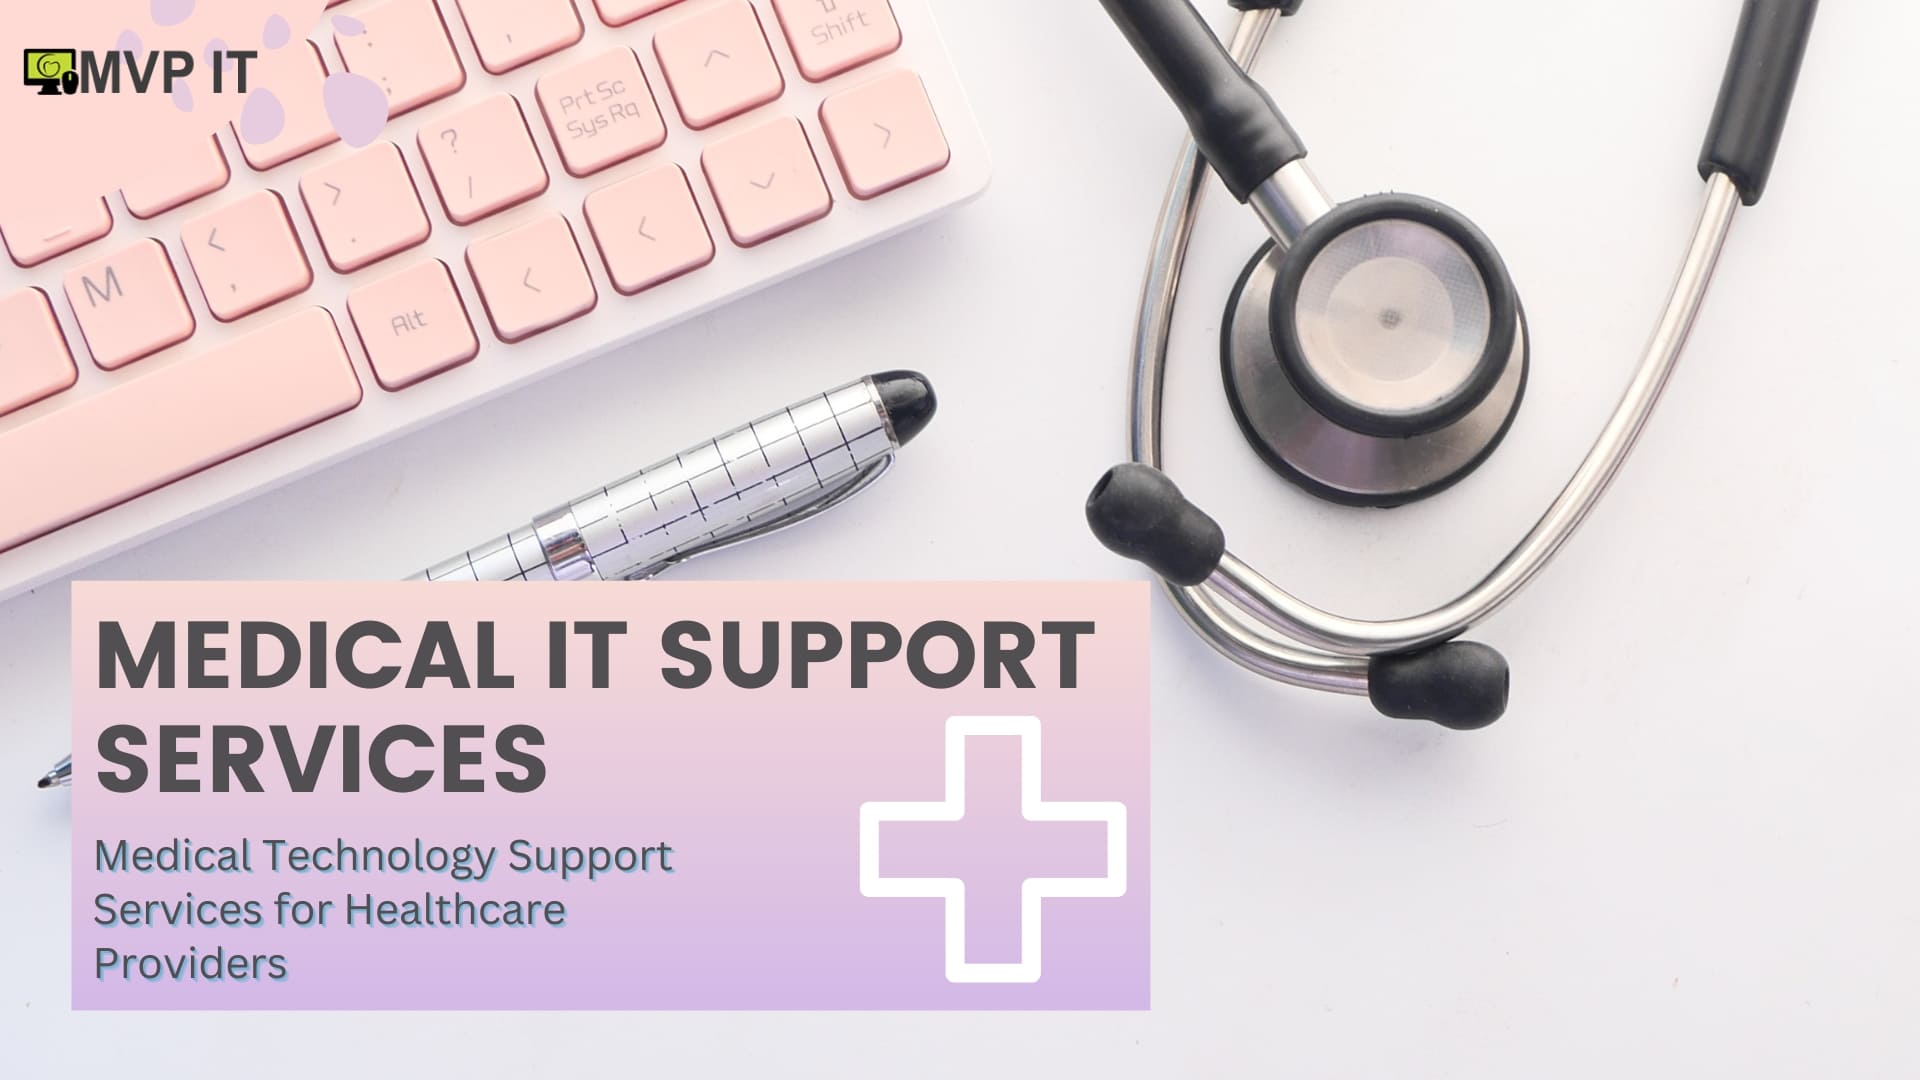 Medical Technology Support Services for Healthcare Providers